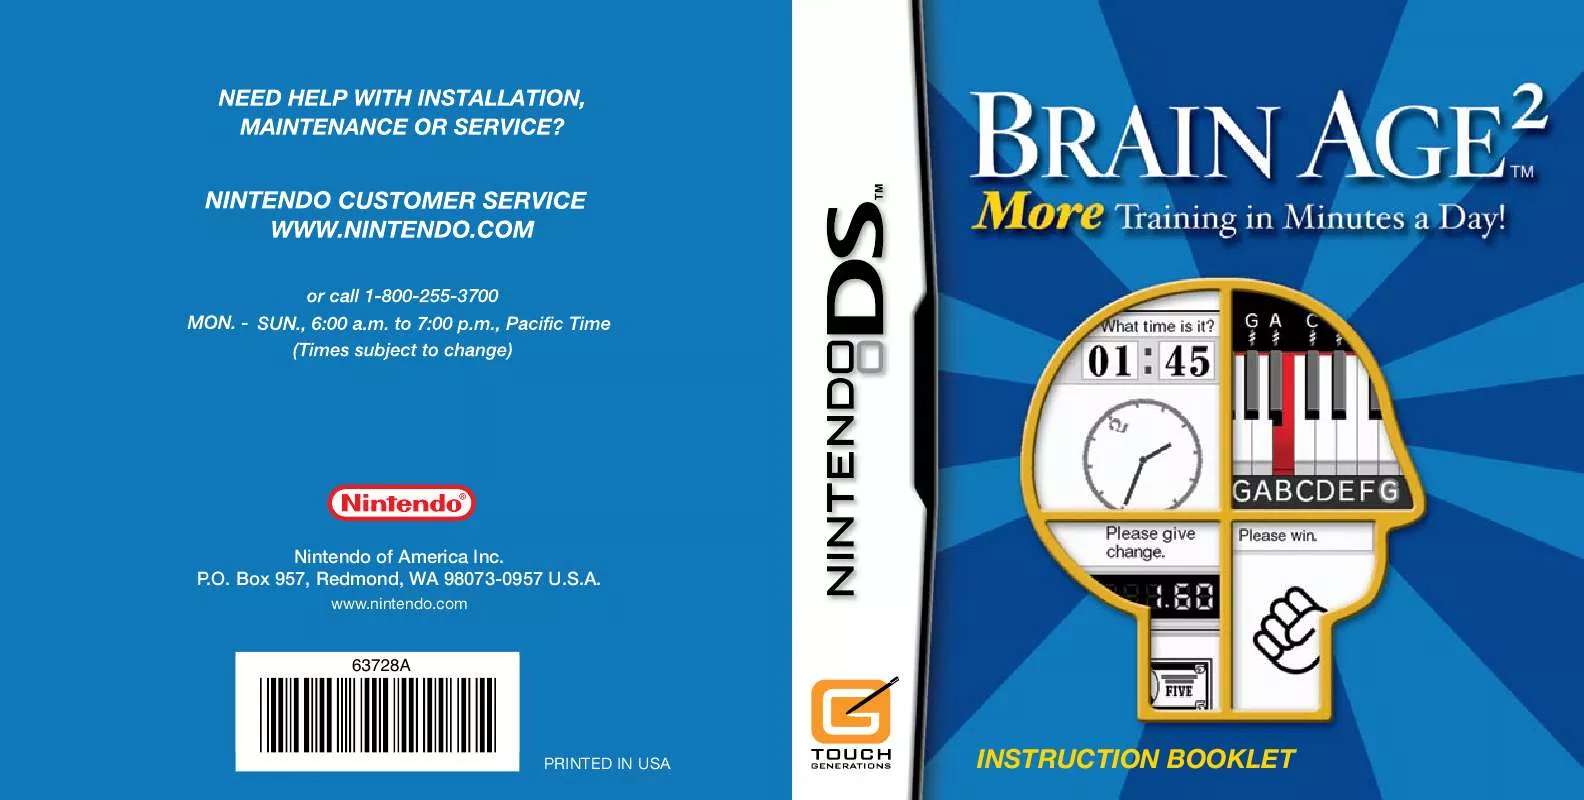 Mode d'emploi NINTENDO BRAIN AGE 2: MORE TRAINING IN MINUTES A DAY!